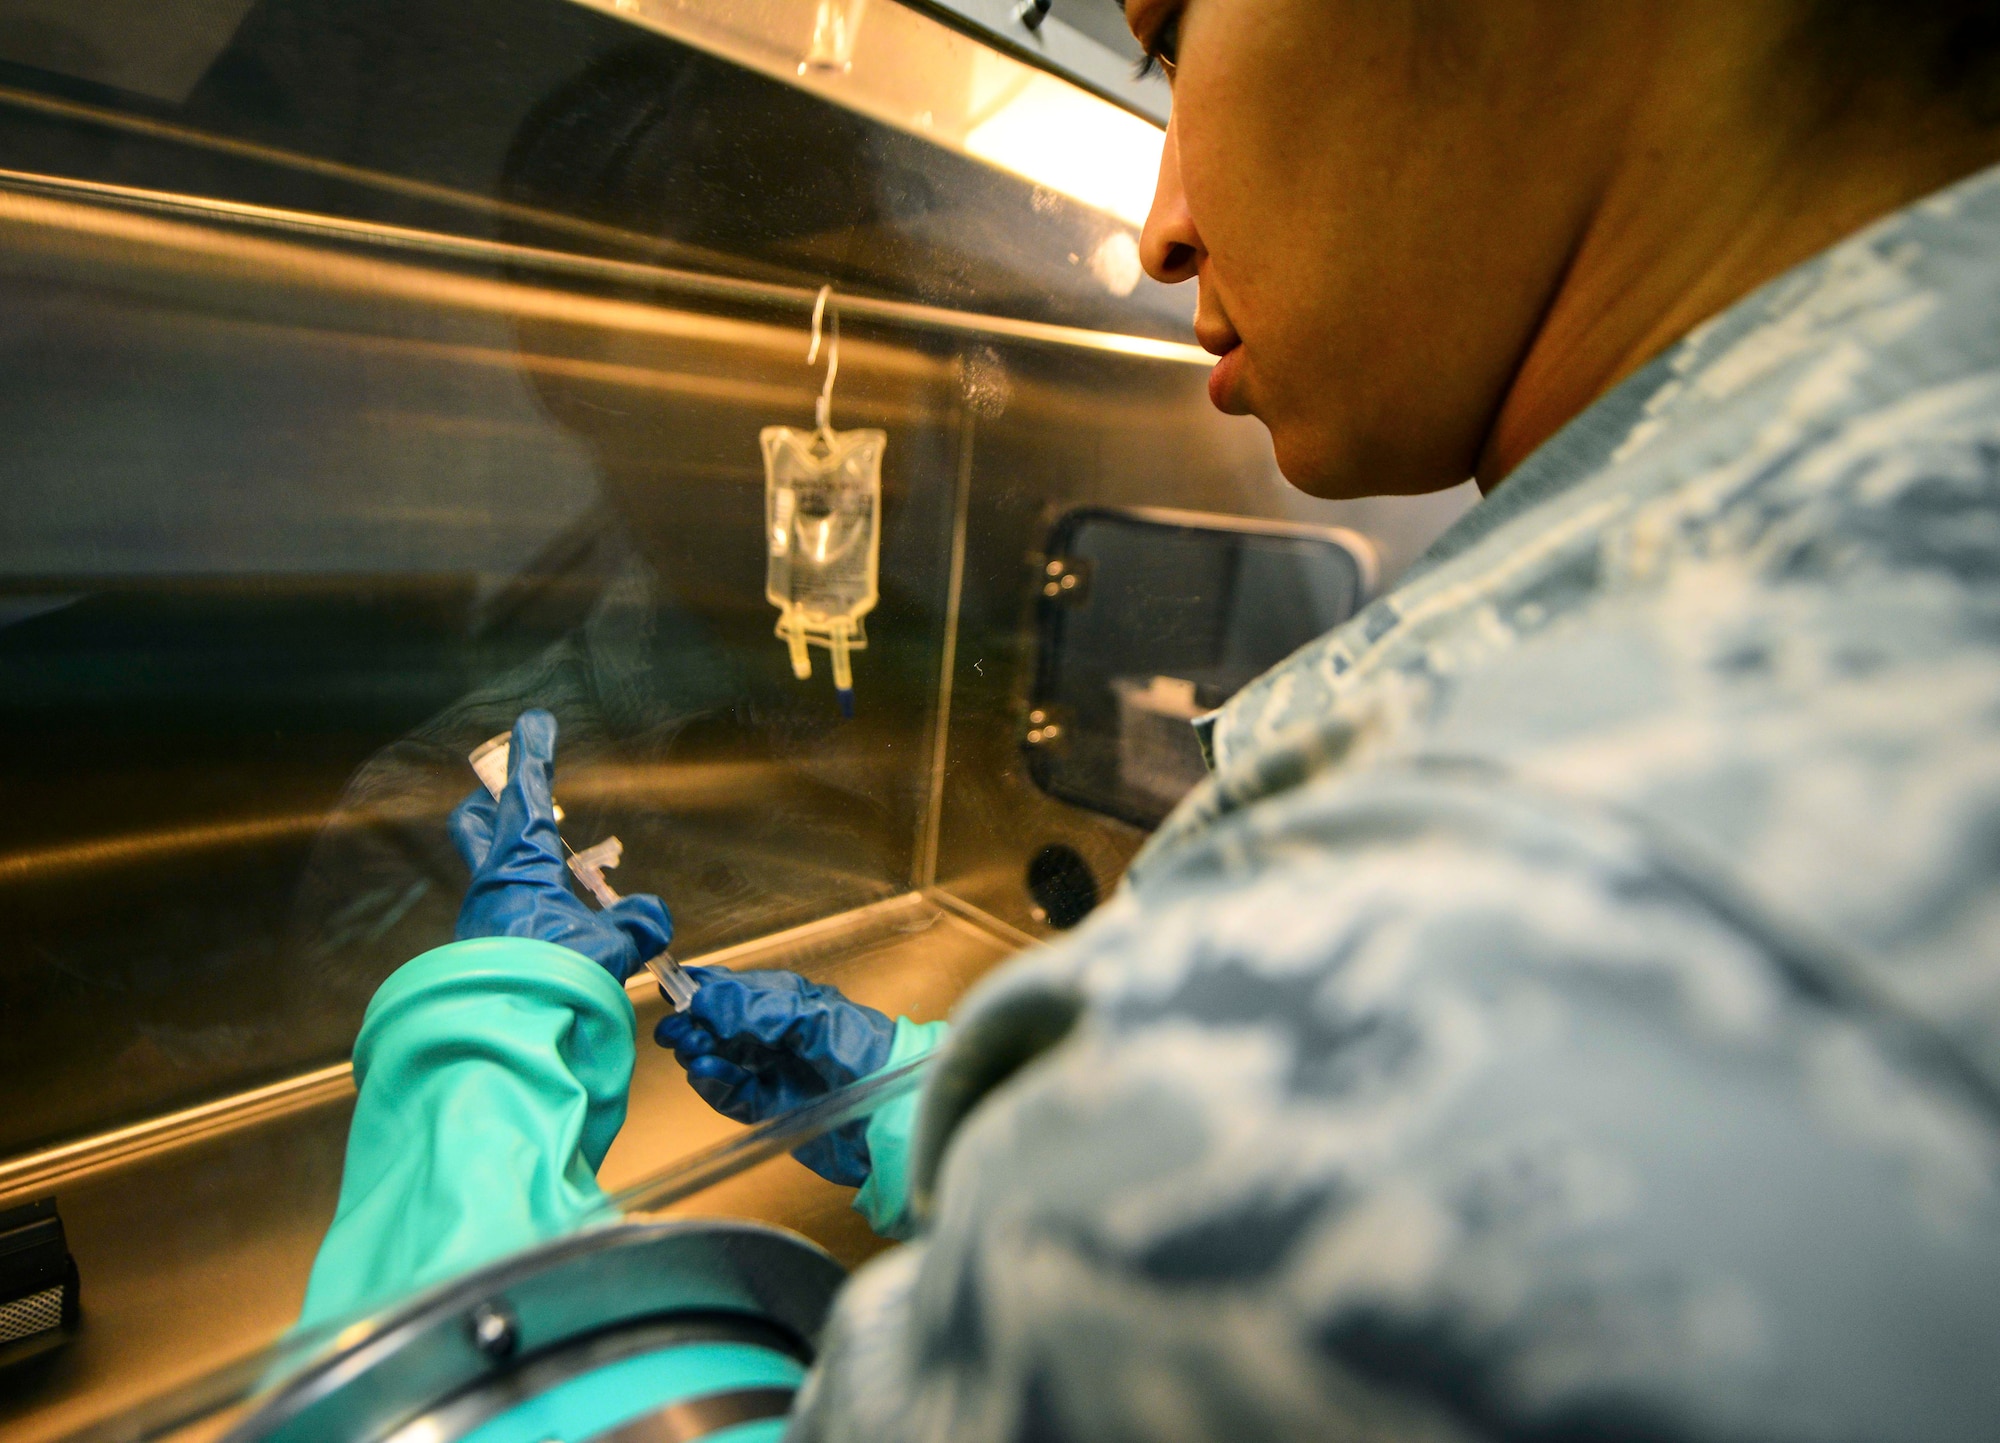 Staff Sgt. Marckia Wilson, 379th Expeditionary Medical Support Squadron pharmacy technician, prepares an intravenous injection to be administered to a patient on the inpatient care ward Oct. 4, 2016, at Al Udeid Air Base, Qatar. Pharmacists and technicians are responsible for ensuring appropriate critical care medications are made using aseptic techniques in the IV hood. (U.S. Air Force photo/Senior Airman Janelle Patiño/Released)